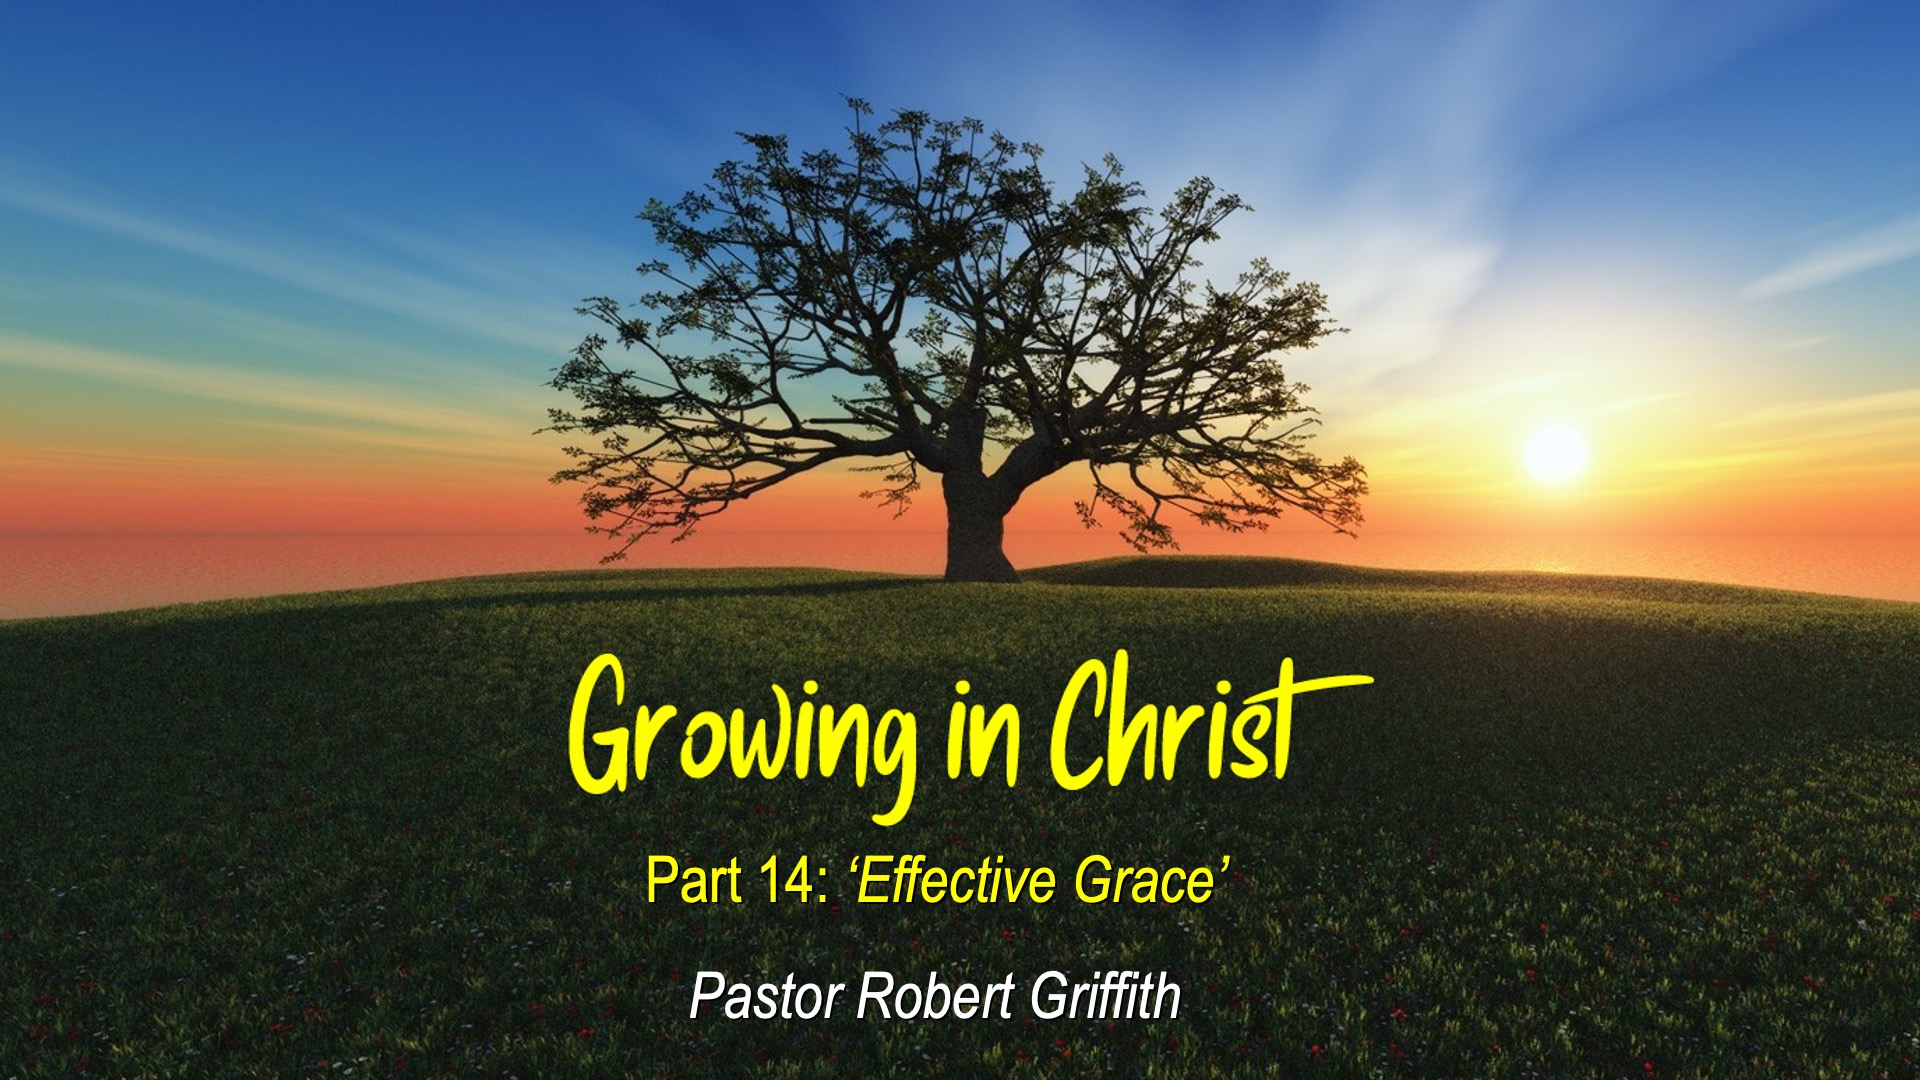 Growing in Christ (14)‘Effective Grace’